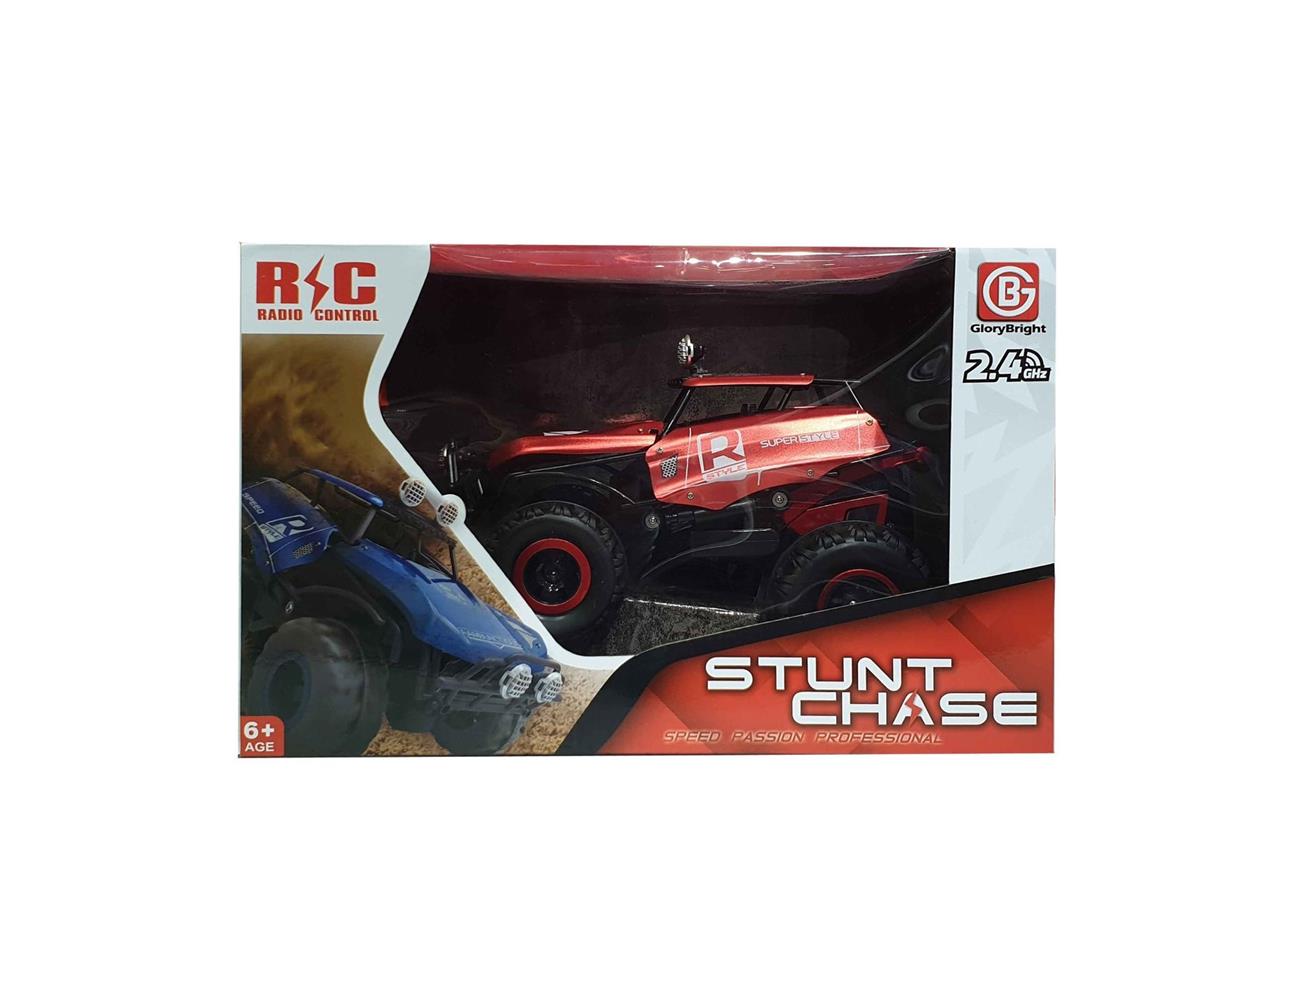 Toy Rc Car Stunt Chase No.G03057R